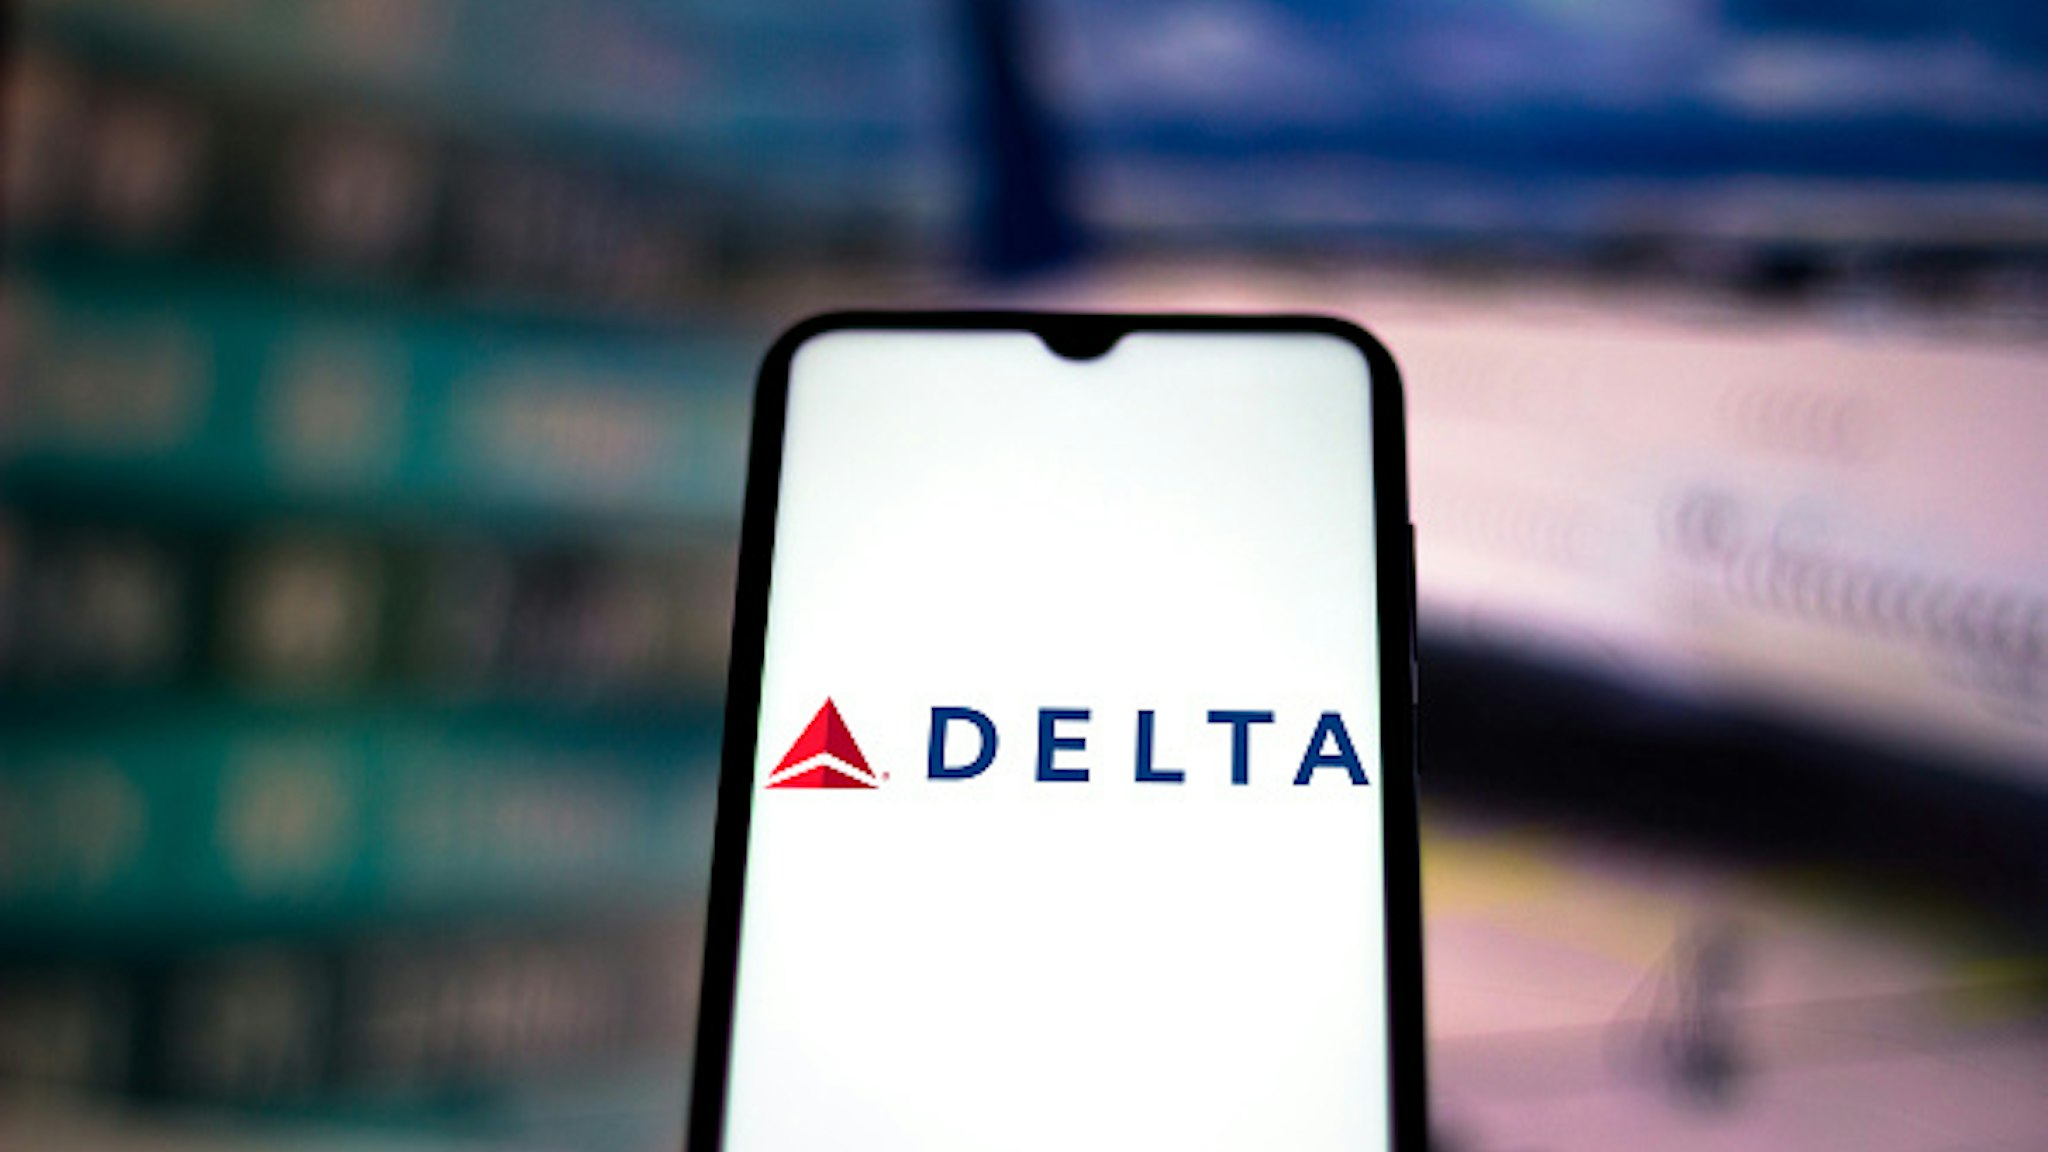 BRAZIL - 2020/06/08: In this photo illustration the Delta Airlines logo seen displayed on a smartphone.